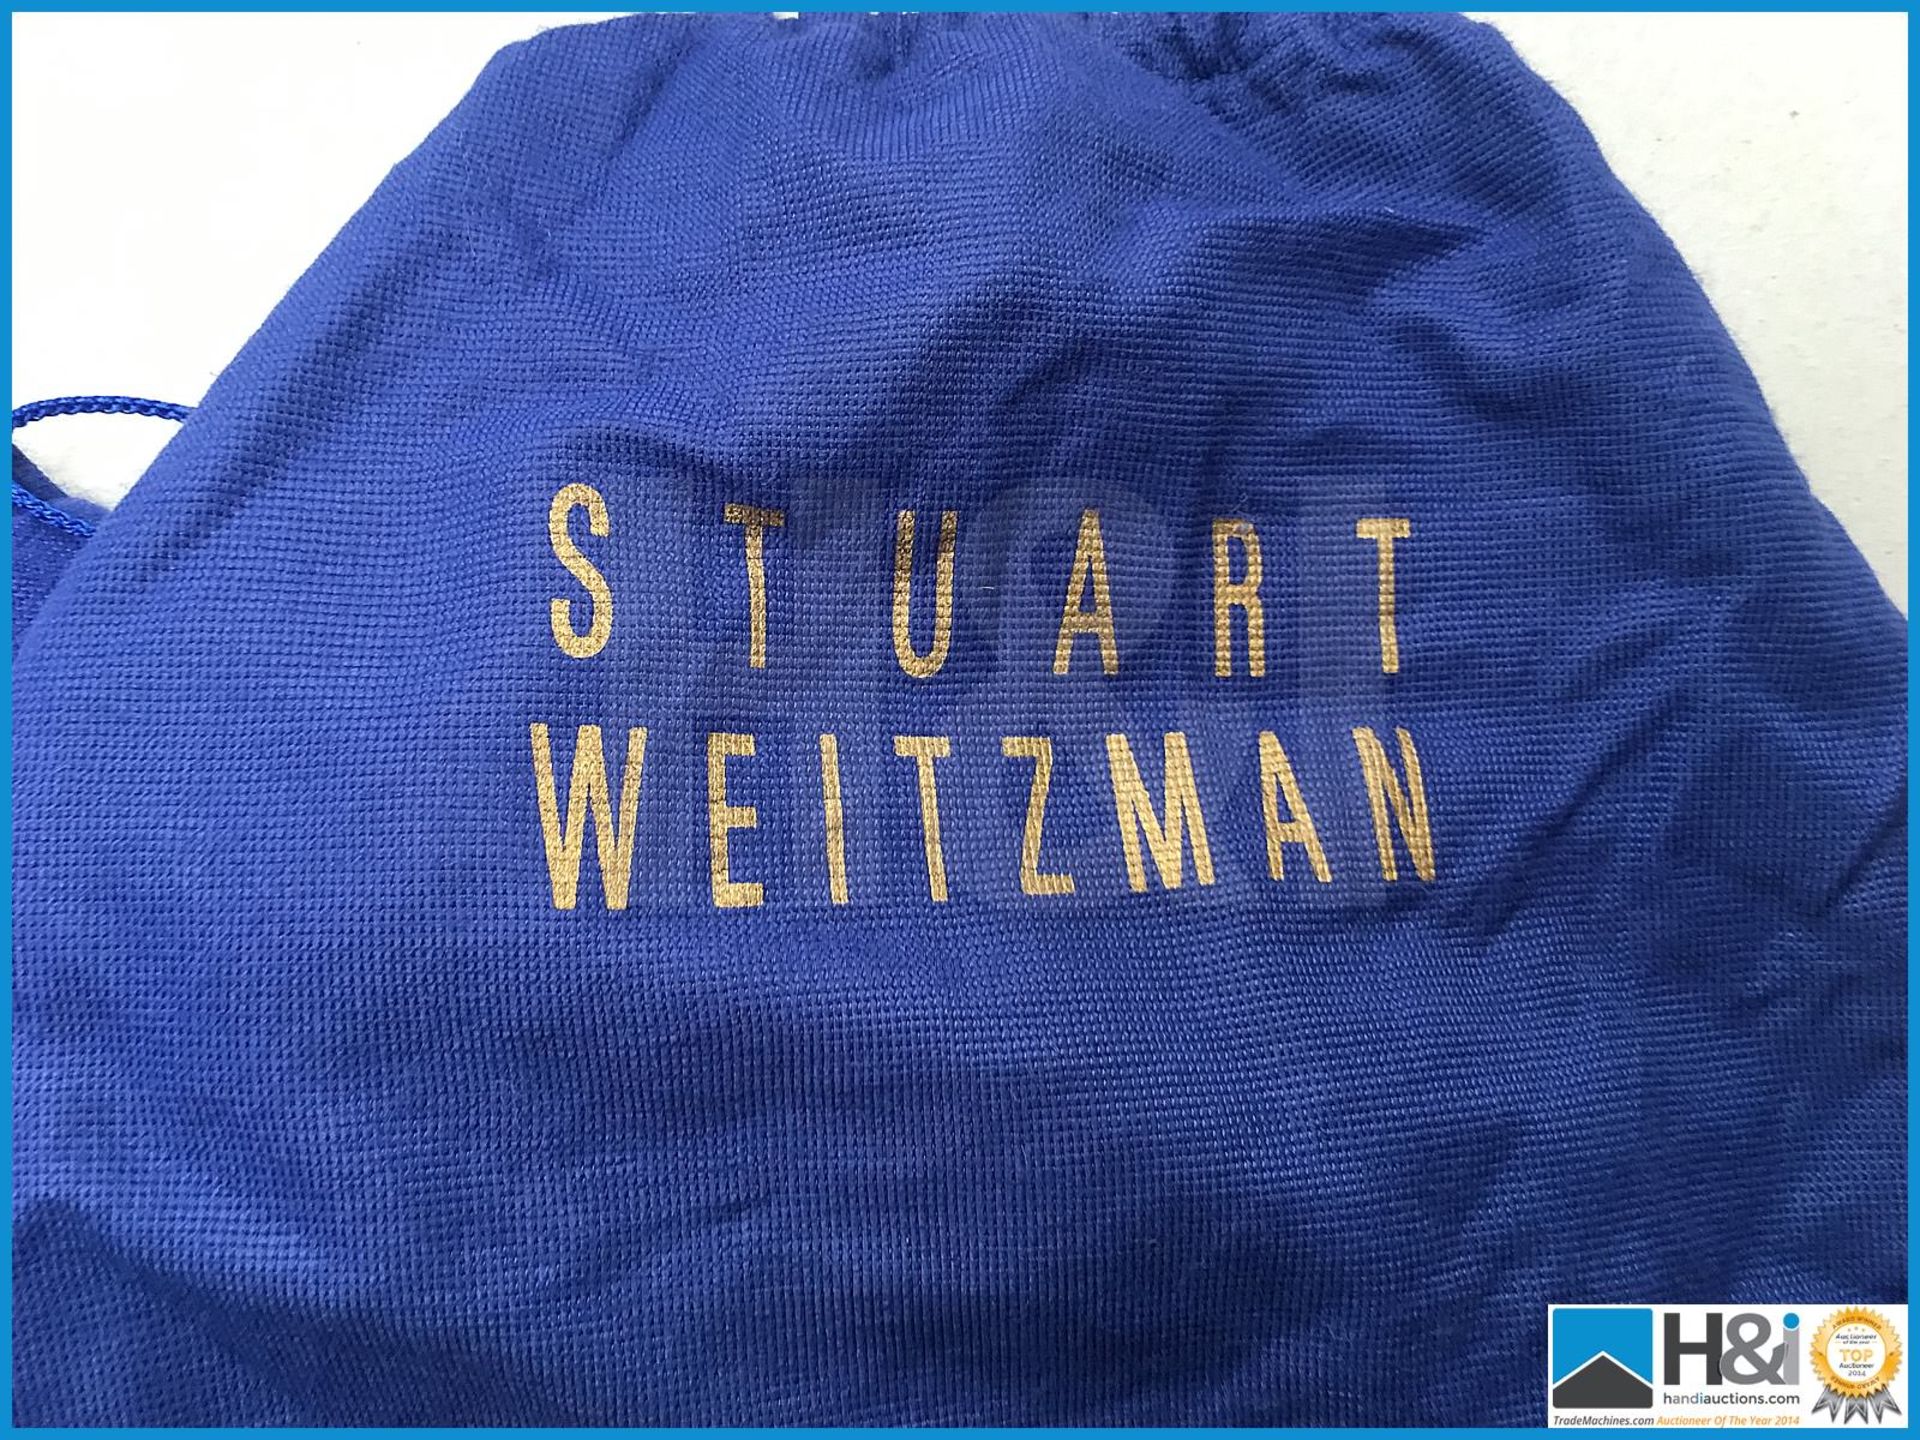 Genuine Stuart Weitzman for Russell & Bromley dress bag with original tie bags in excellent conditio - Image 5 of 5